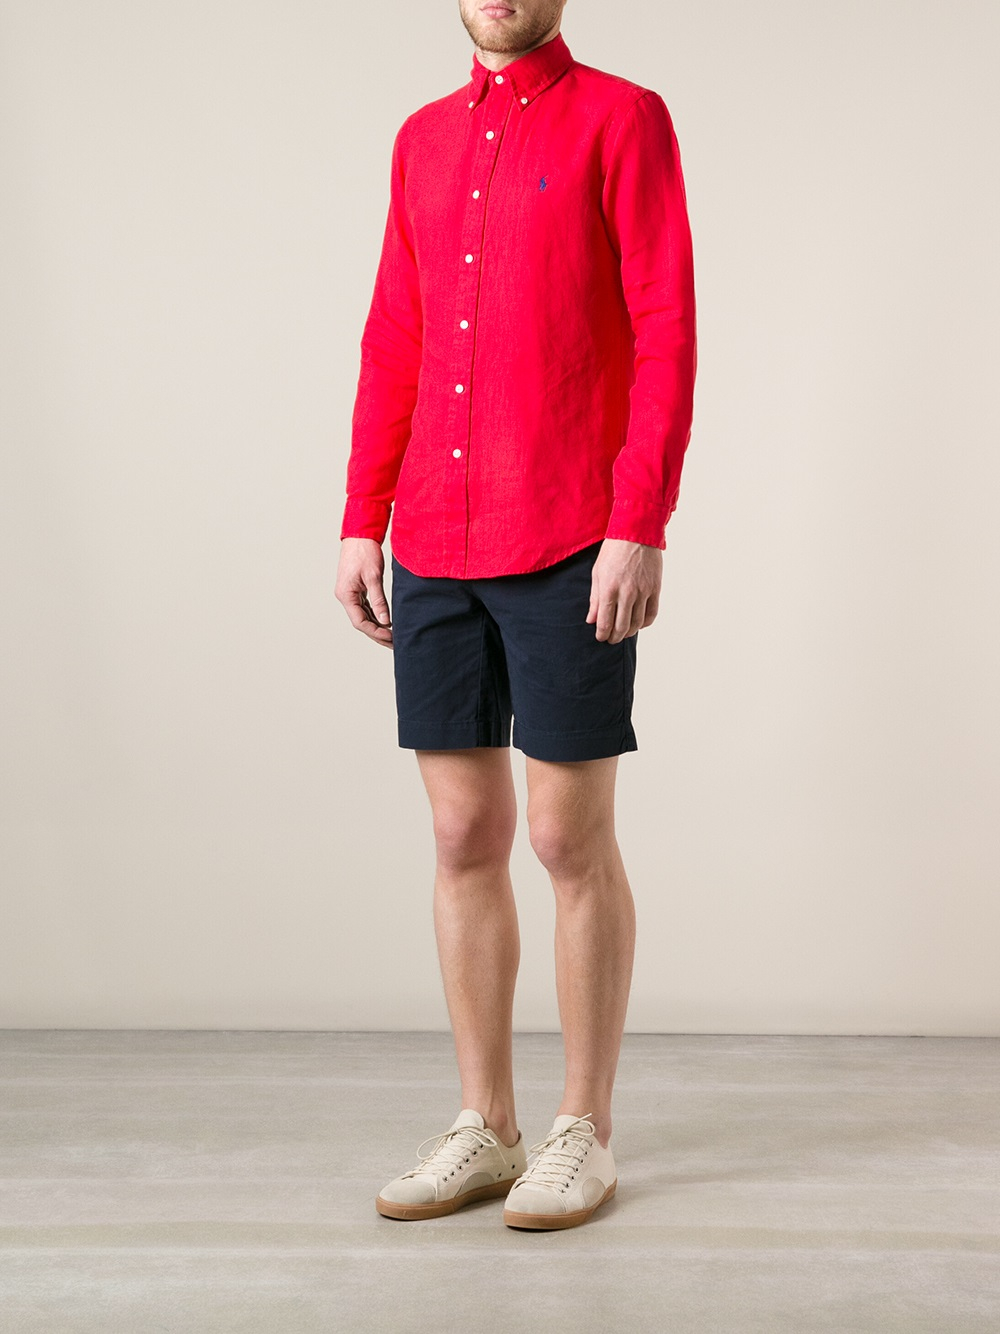 Polo Ralph Lauren Classic Shirt in Red for Men - Lyst